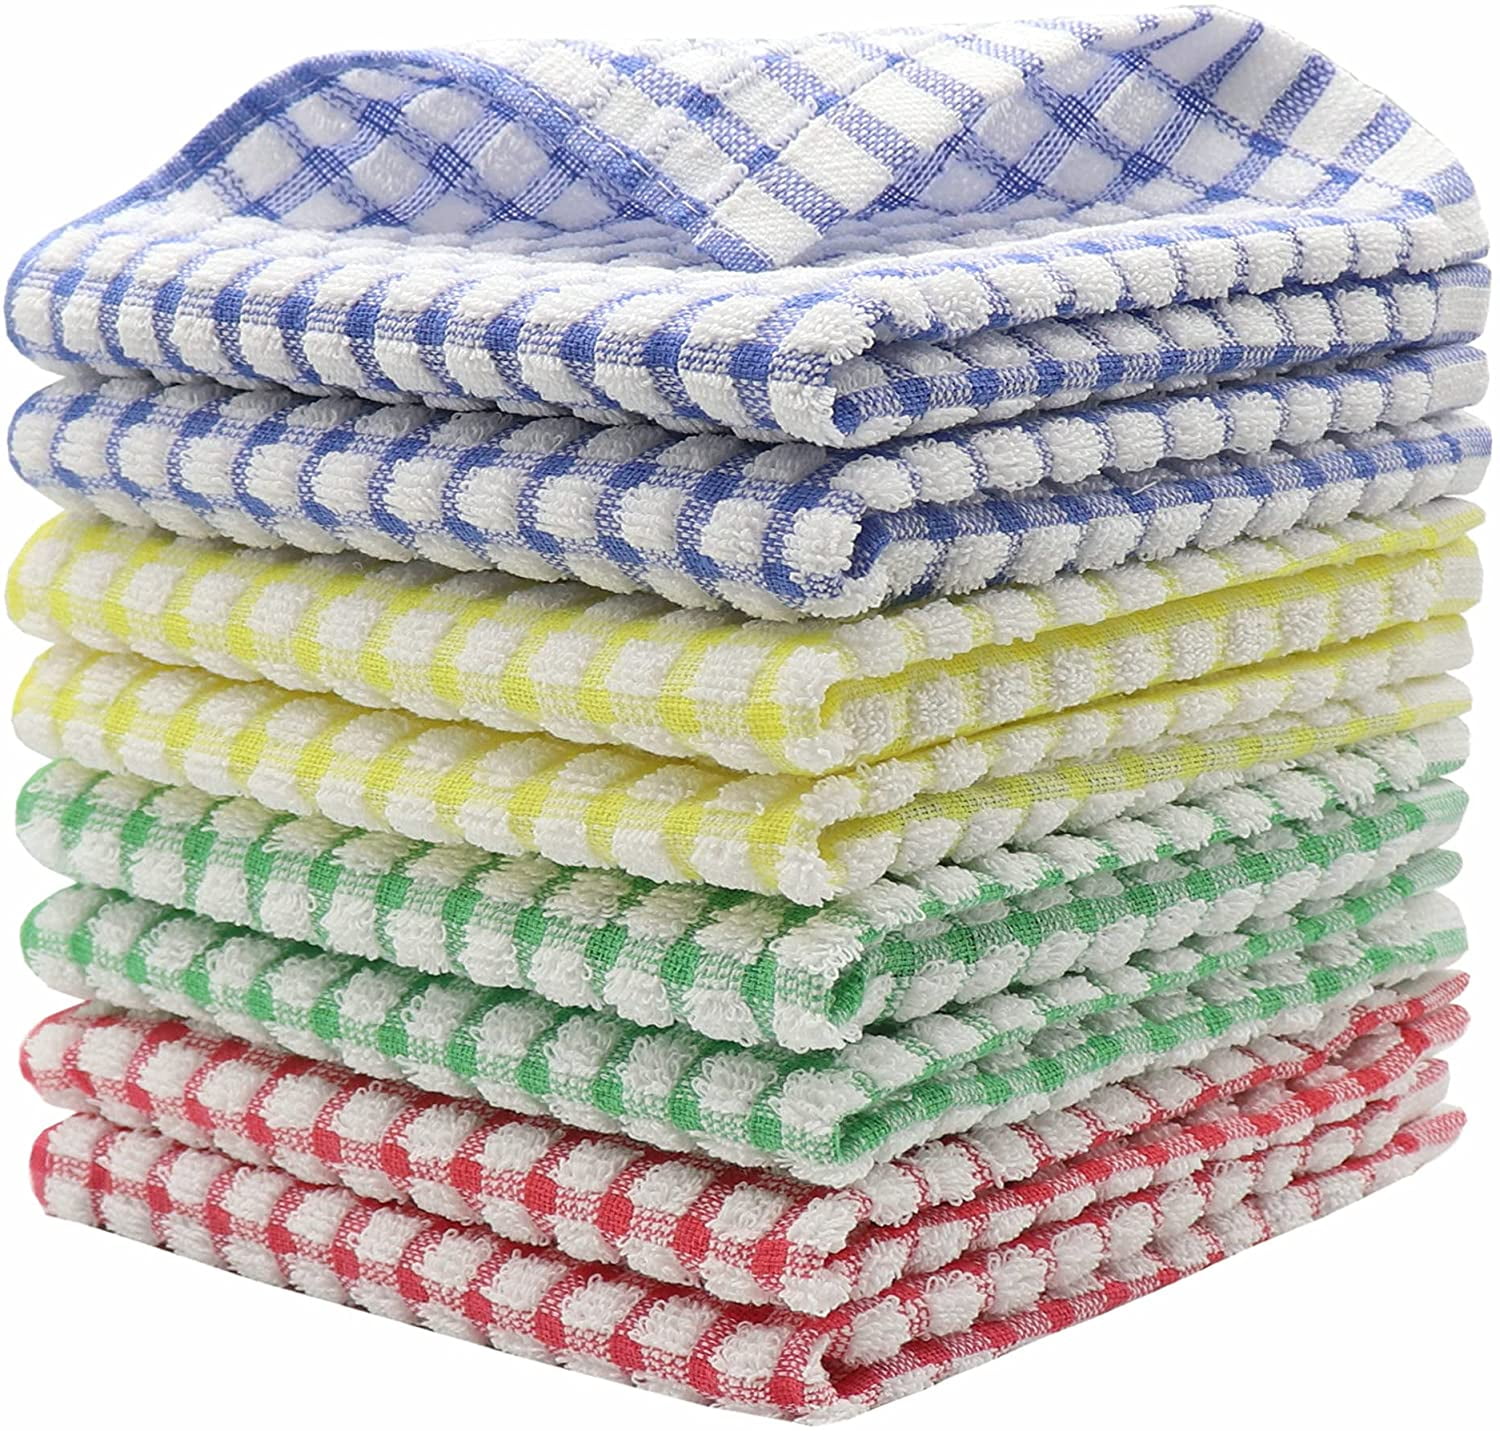 Hfgblg Cotton Dish Rags Tidy Dish Cloths Bulk Dish Towels, Set of 8 Kitchen Cleaning Rags, Soft and Absorbent Cleaning Cloth Wash Cloths, 12 inch x 12